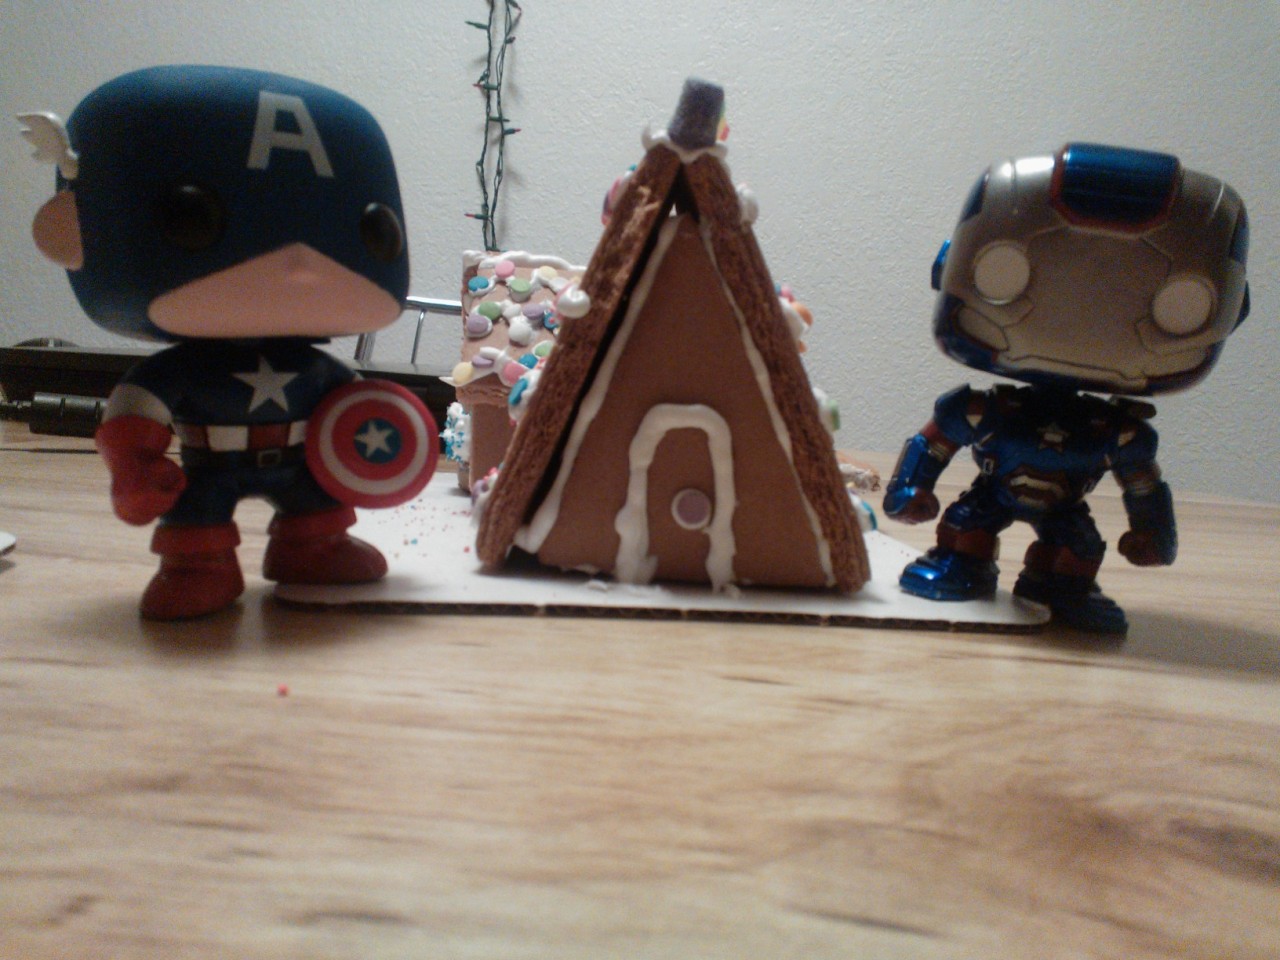 Merry Christmas from Captain America, Iron Patriot, and my new stuffed moose I decided